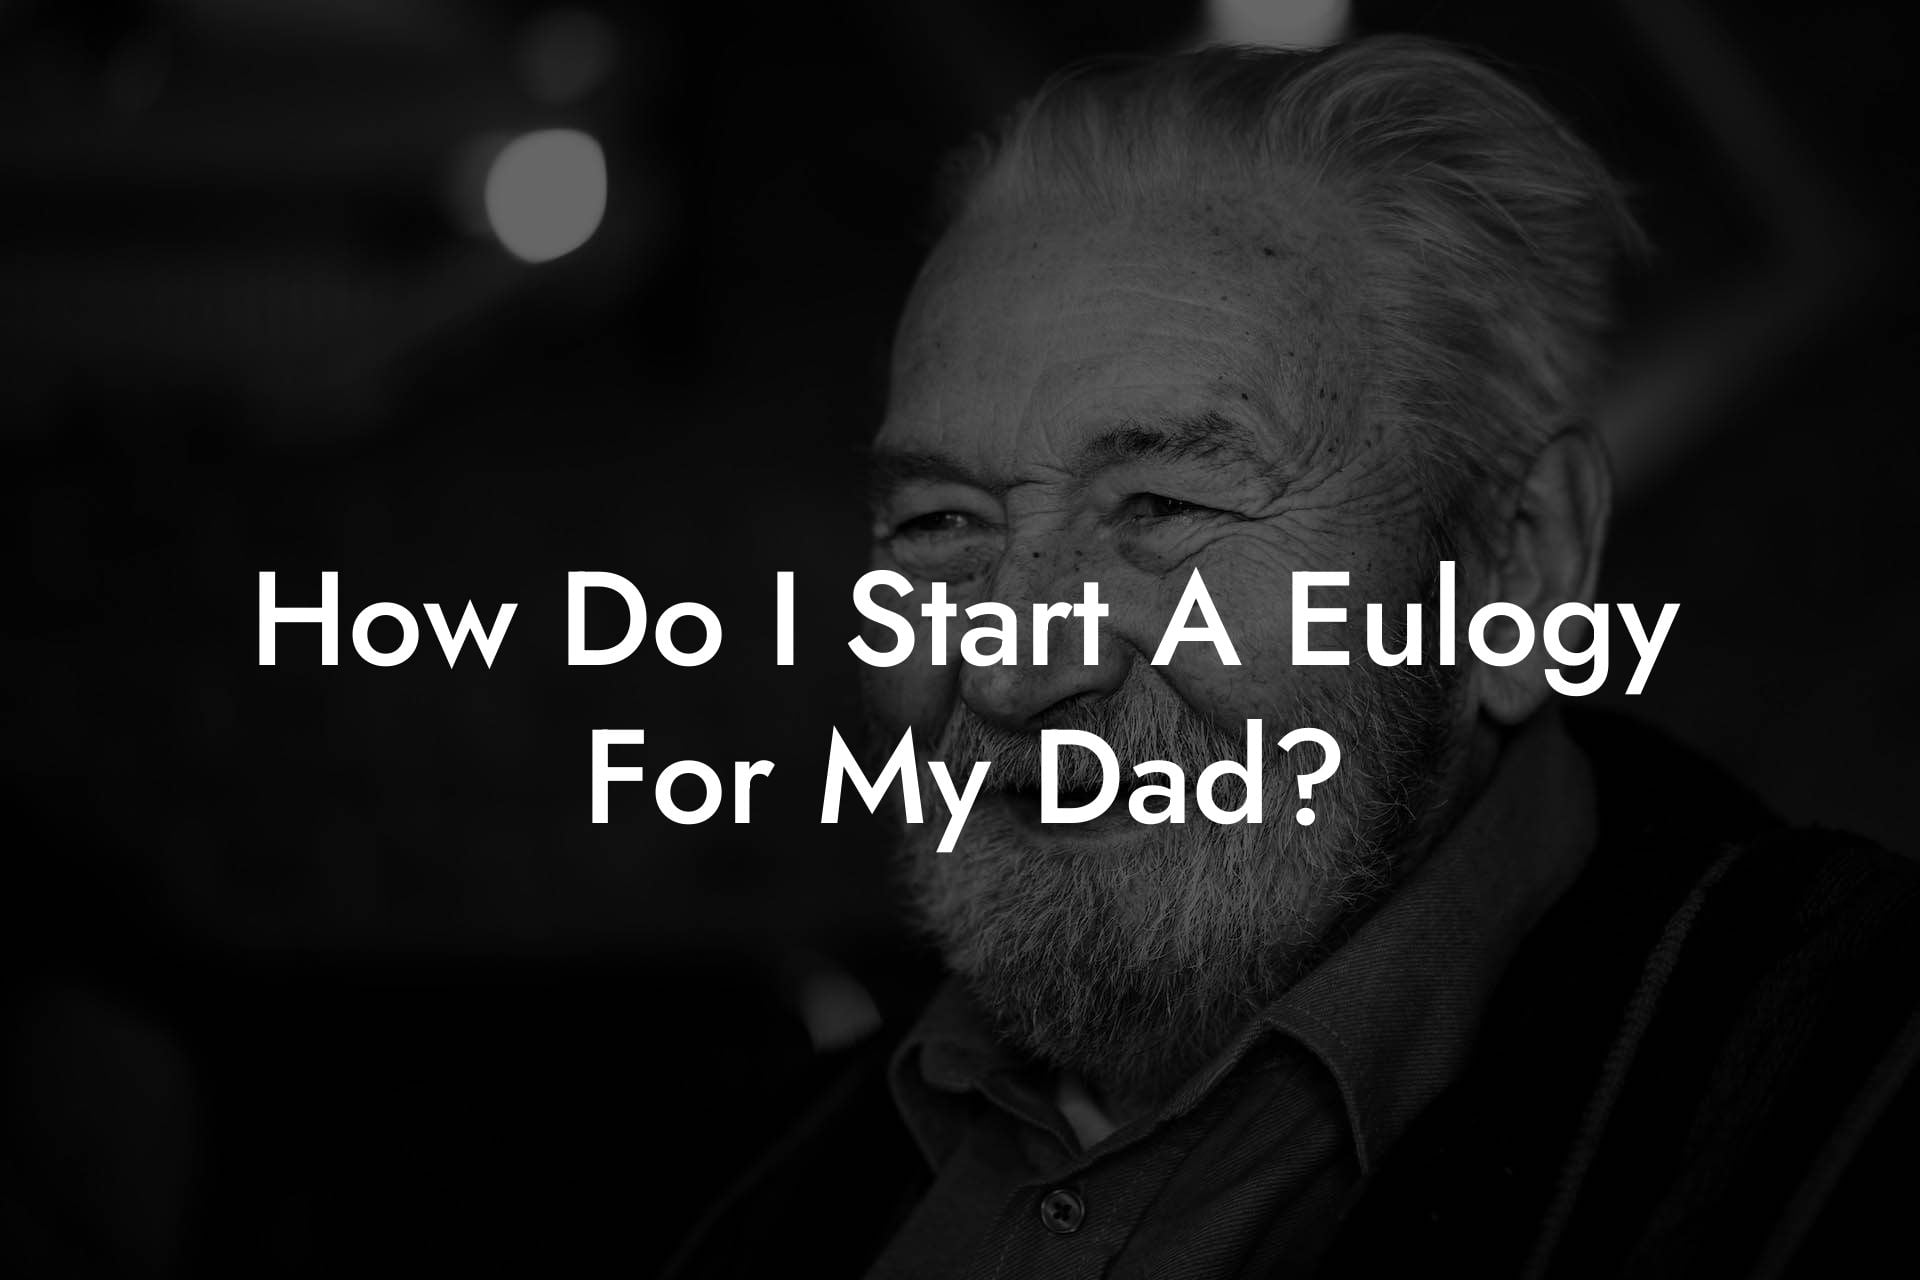 How Do I Start A Eulogy For My Dad? - Eulogy Assistant